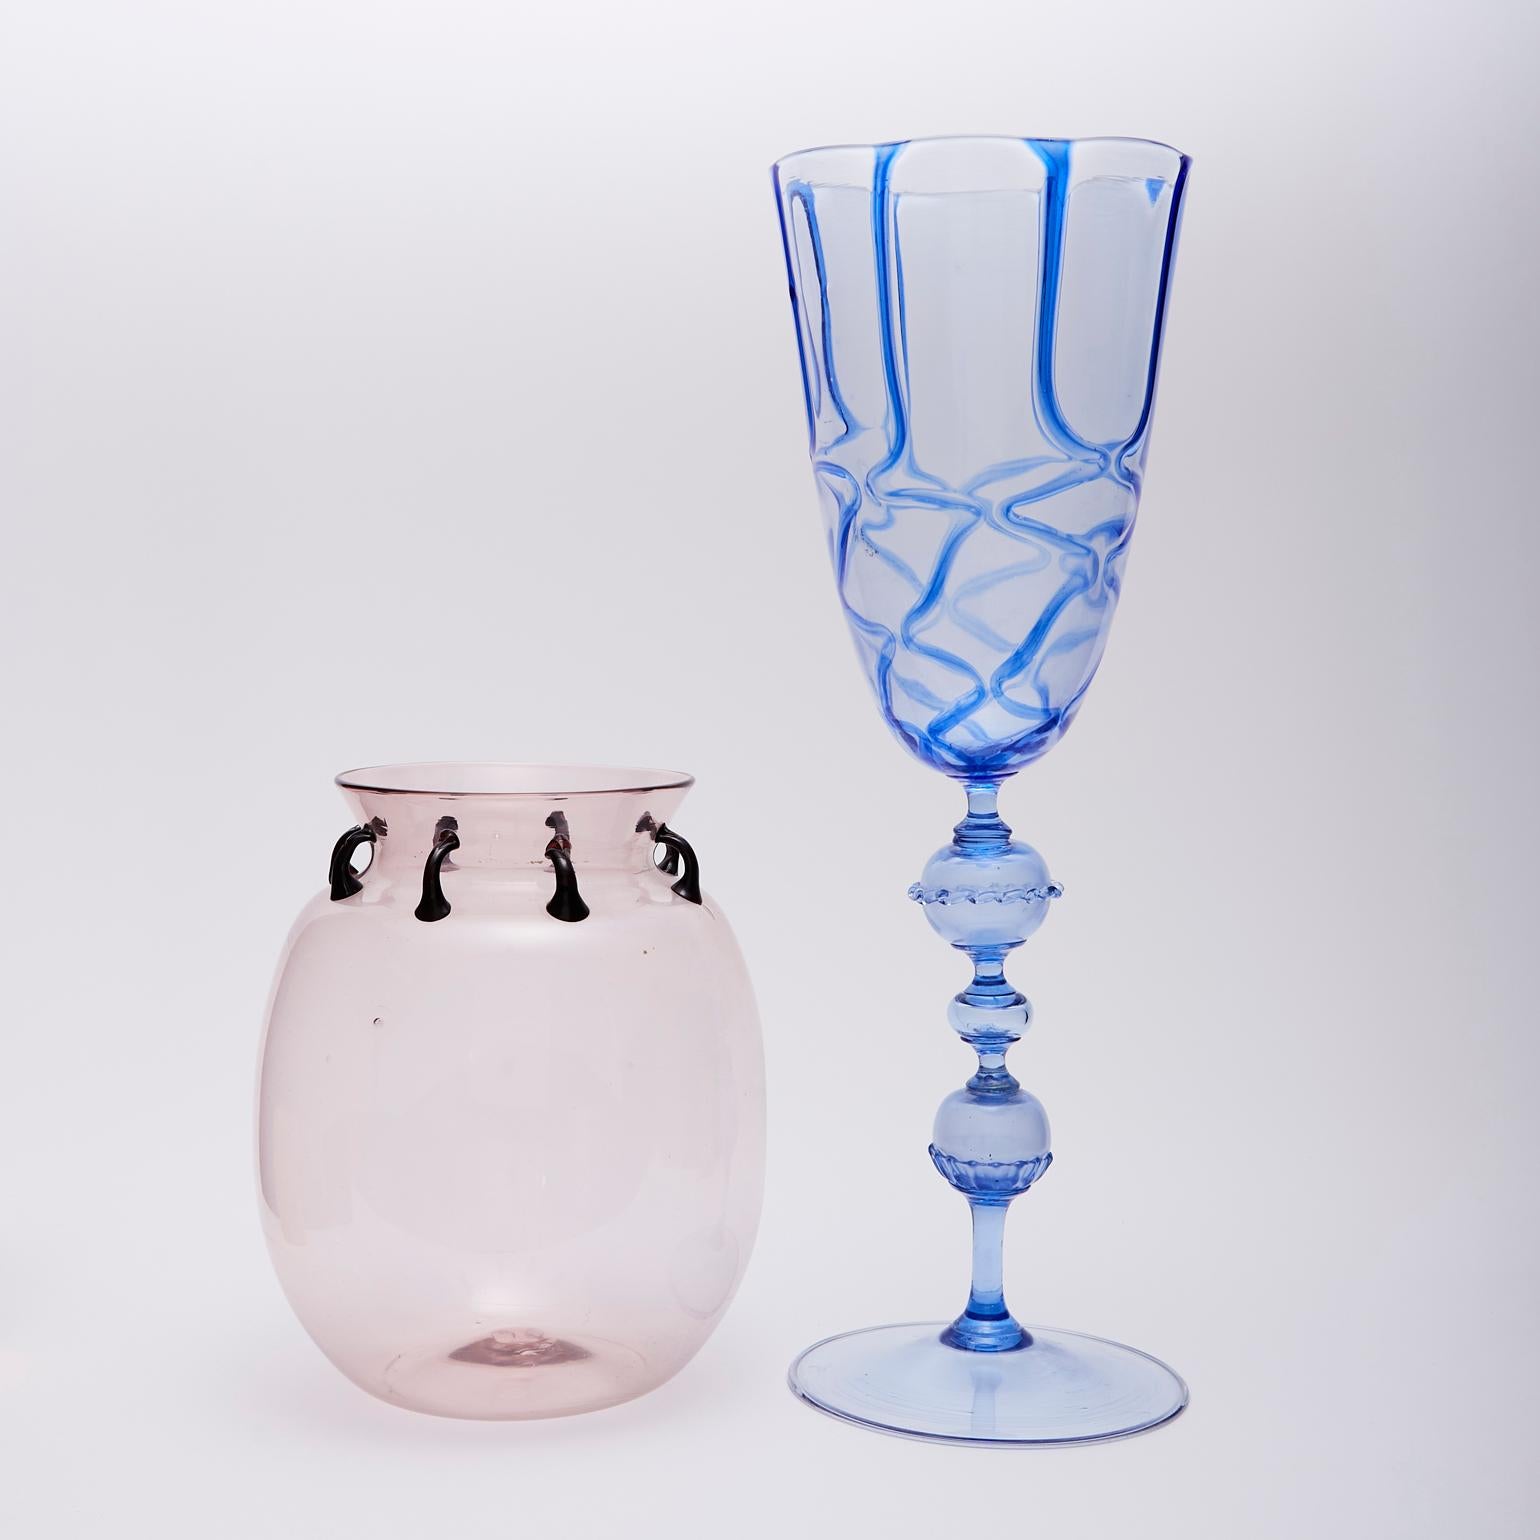 Art Glass Large Chalice with Blue Decoration by Artistica Barovier, 1920's Italy For Sale